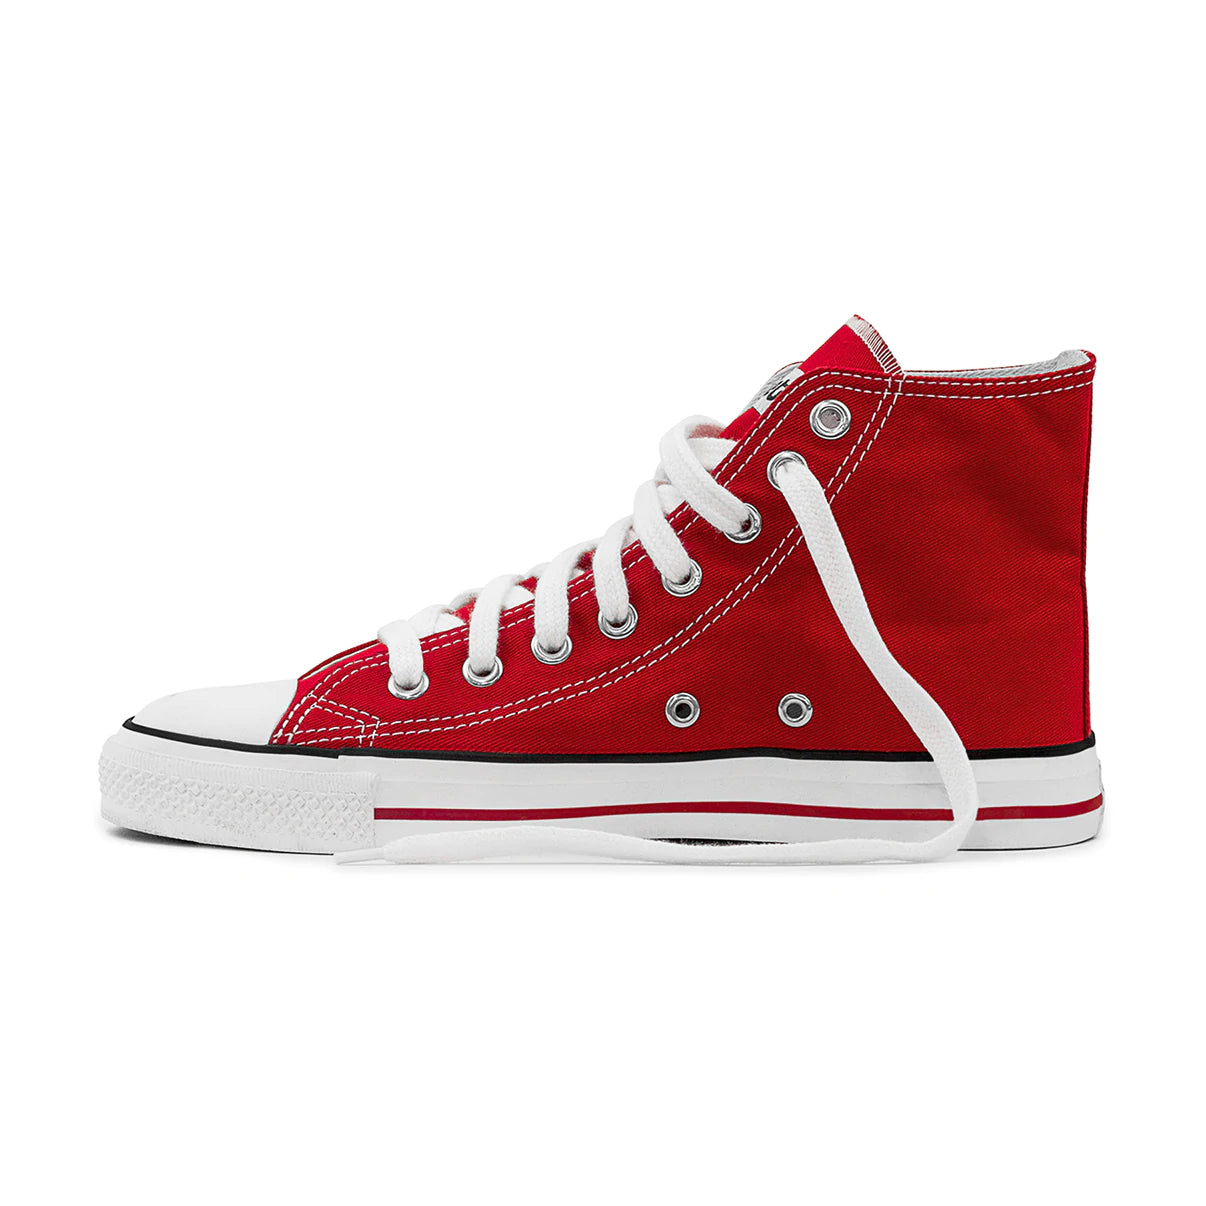 Etiko Fairtrade Certified High Top Style Red and White Vegan Sneakers, Eco-Friendly